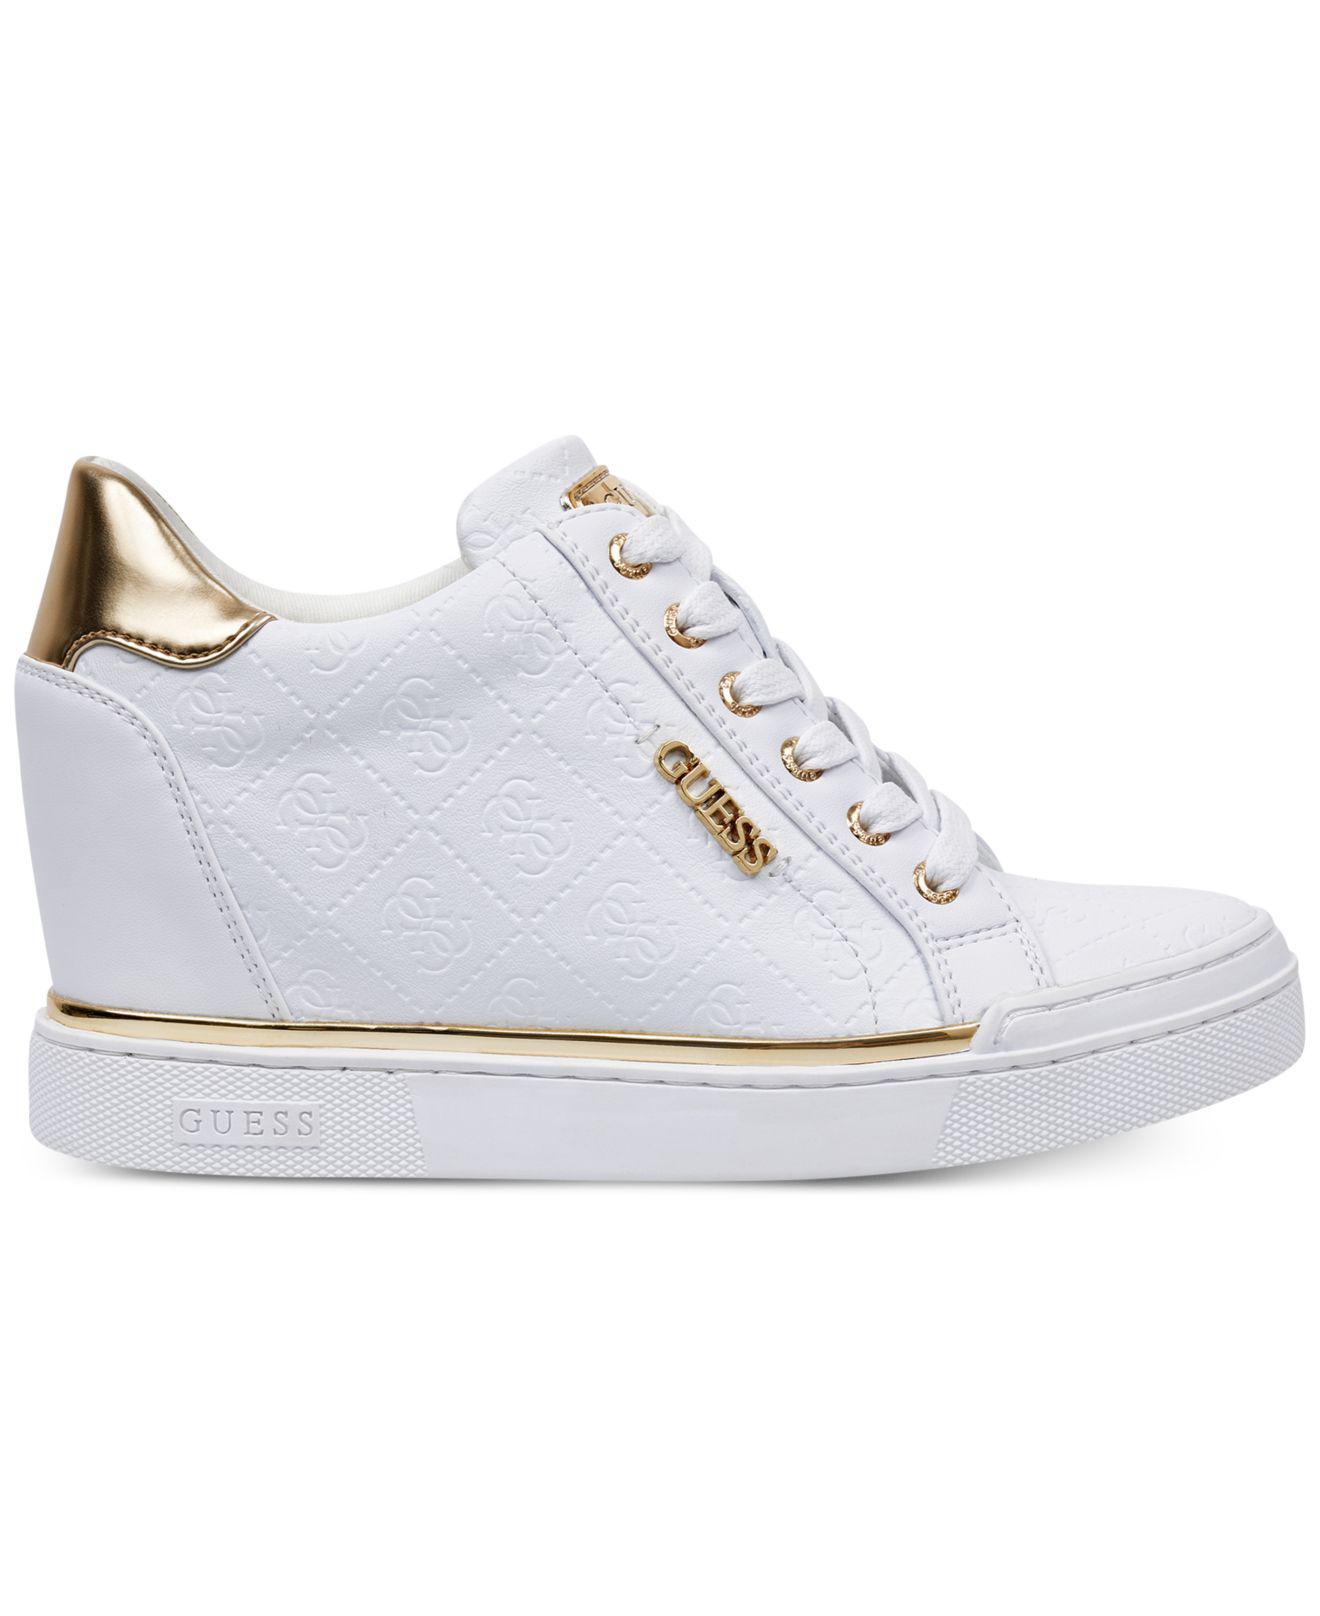 Guess Flowurs Wedge Sneakers in White - Lyst